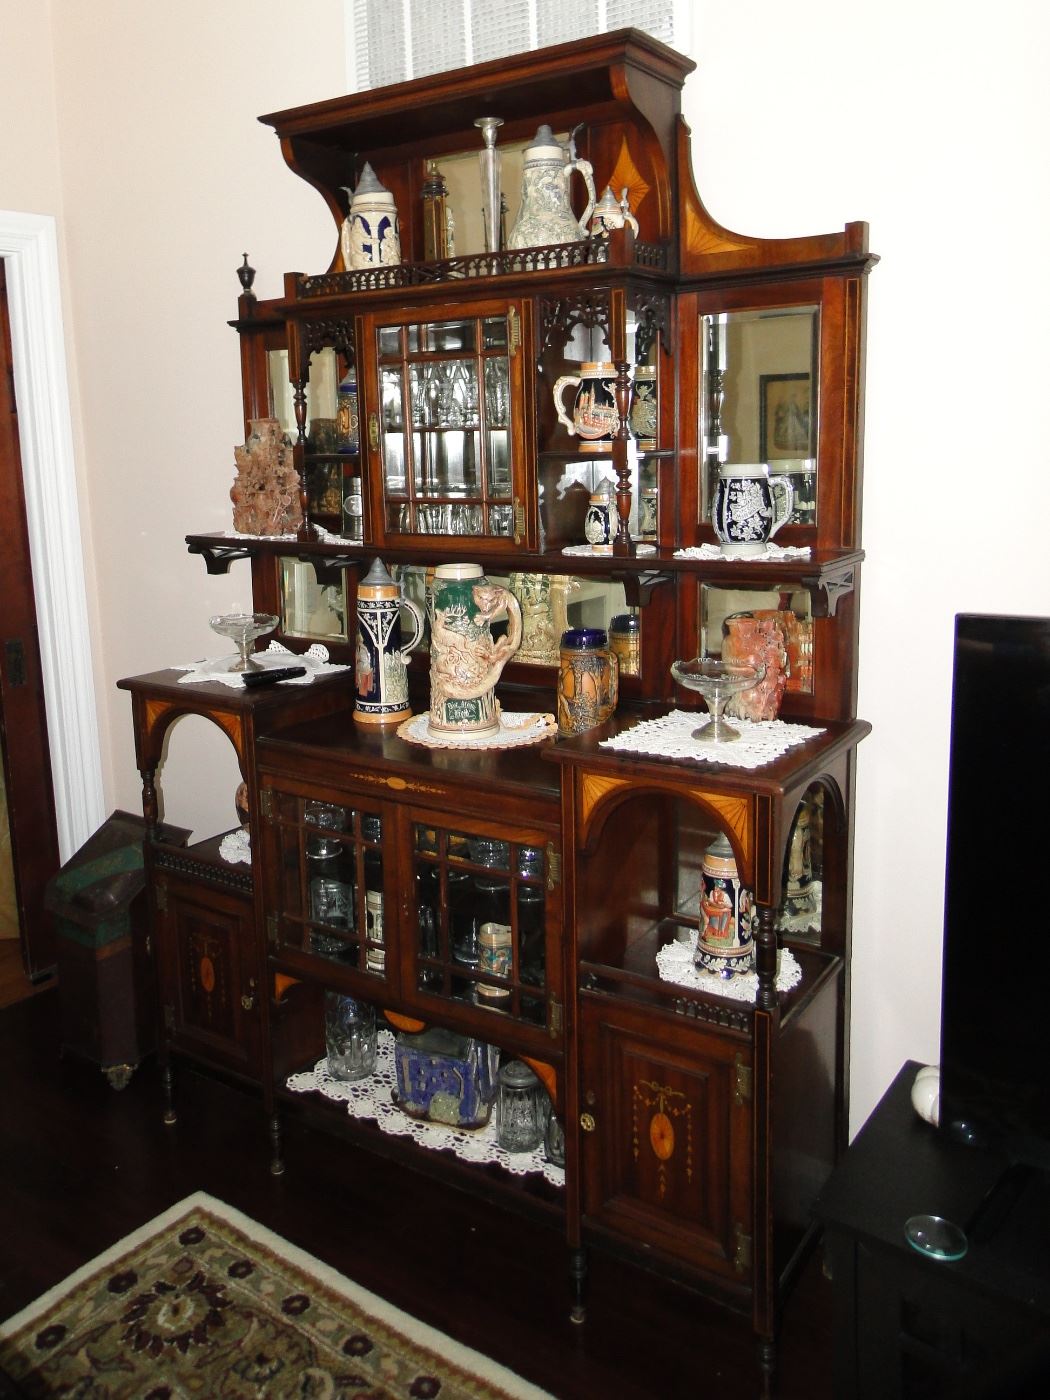 Antique Display cabinet (87x5'x17) with Marquetry Loaded with German beer steins, Glassware etc.